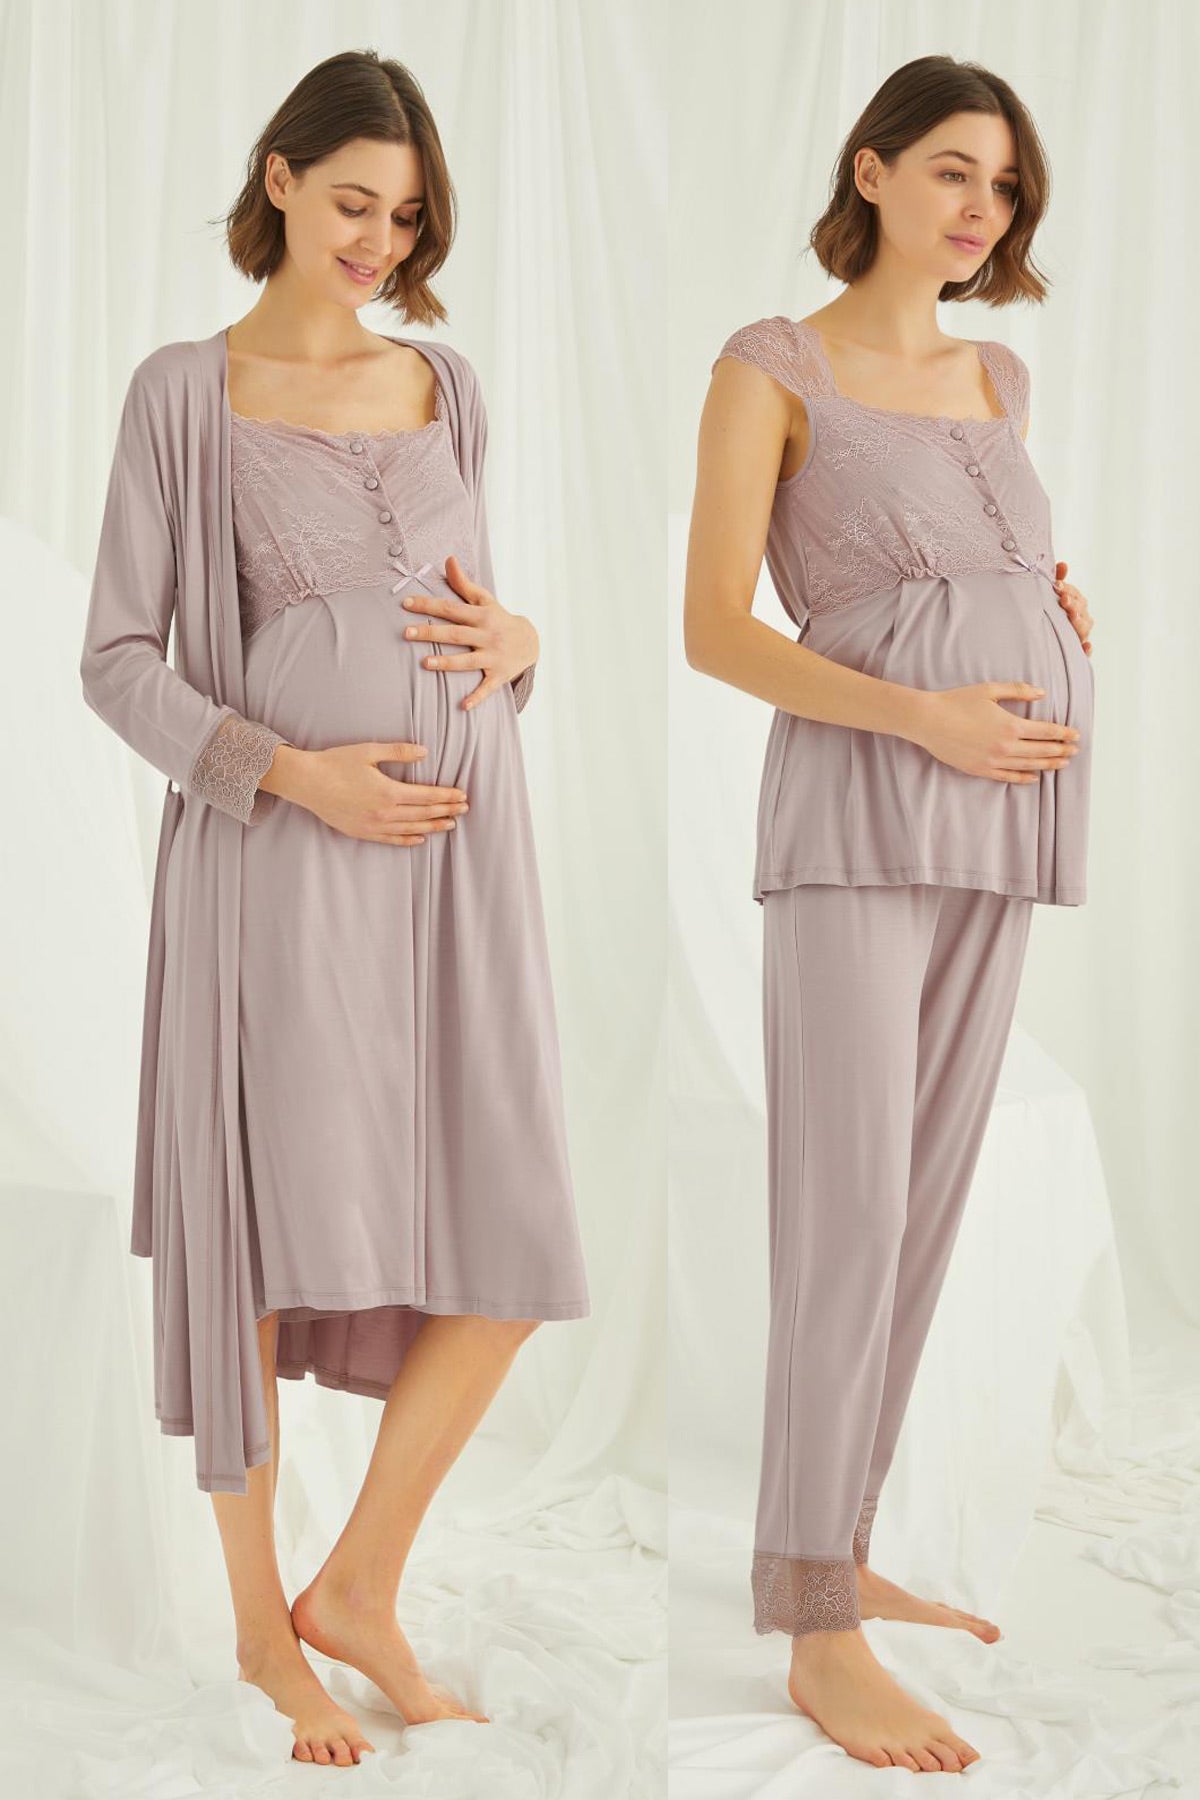 Shopymommy 438440 Lace 4 Pieces Maternity & Nursing Set Coffee